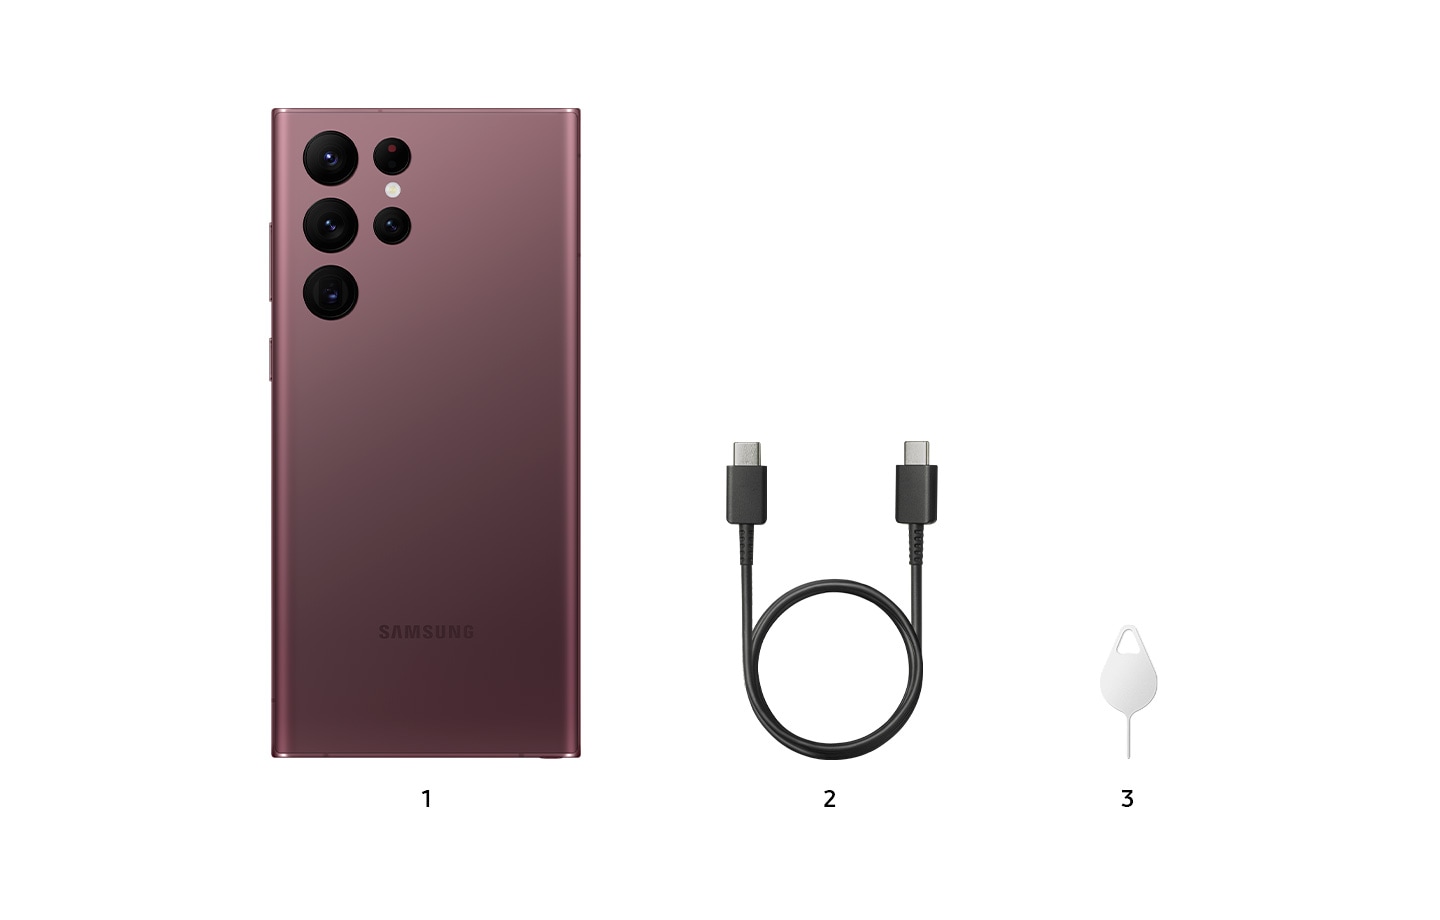 Three products stand next to one another in a row as part of the Galaxy S22 Ultra Package. The first one is a Black Galaxy S22 Ultra. The second one is a charging cable. The third one is an ejection pin. The products in a row are numbered consecutively from 1 to 3. 